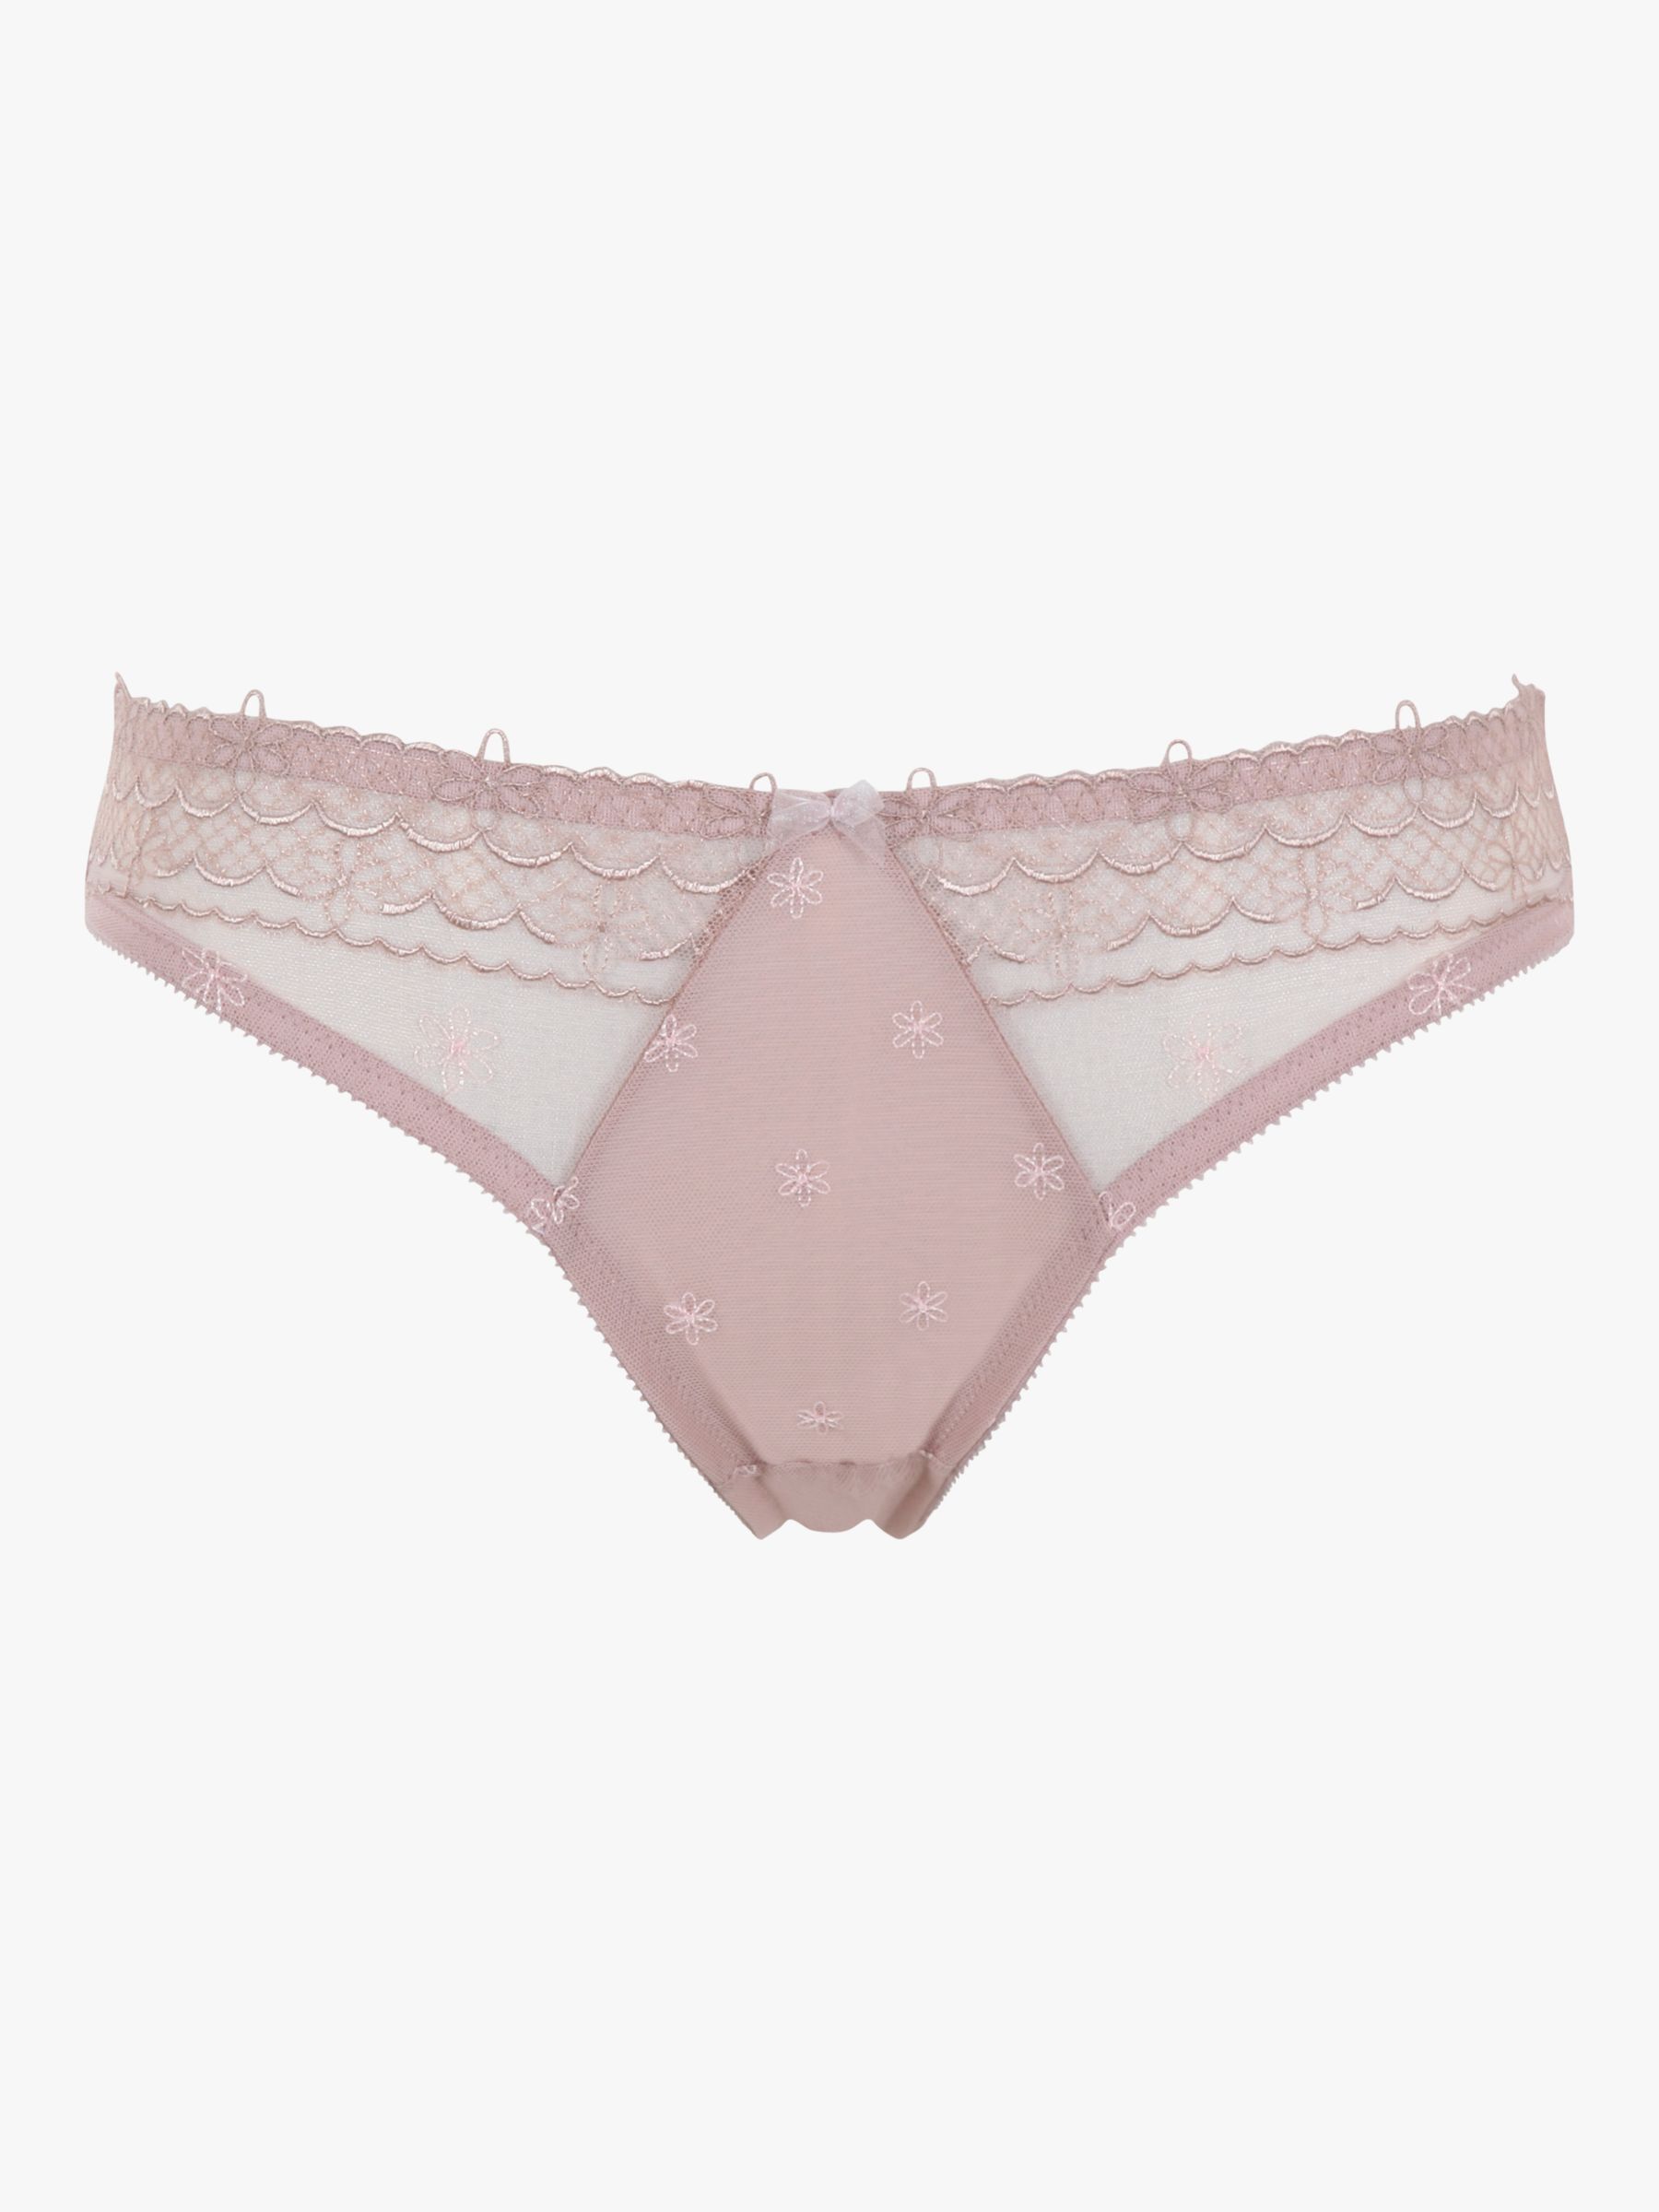 Buy Panache Cleo Blossom Brazilian Briefs, Taupe Online at johnlewis.com